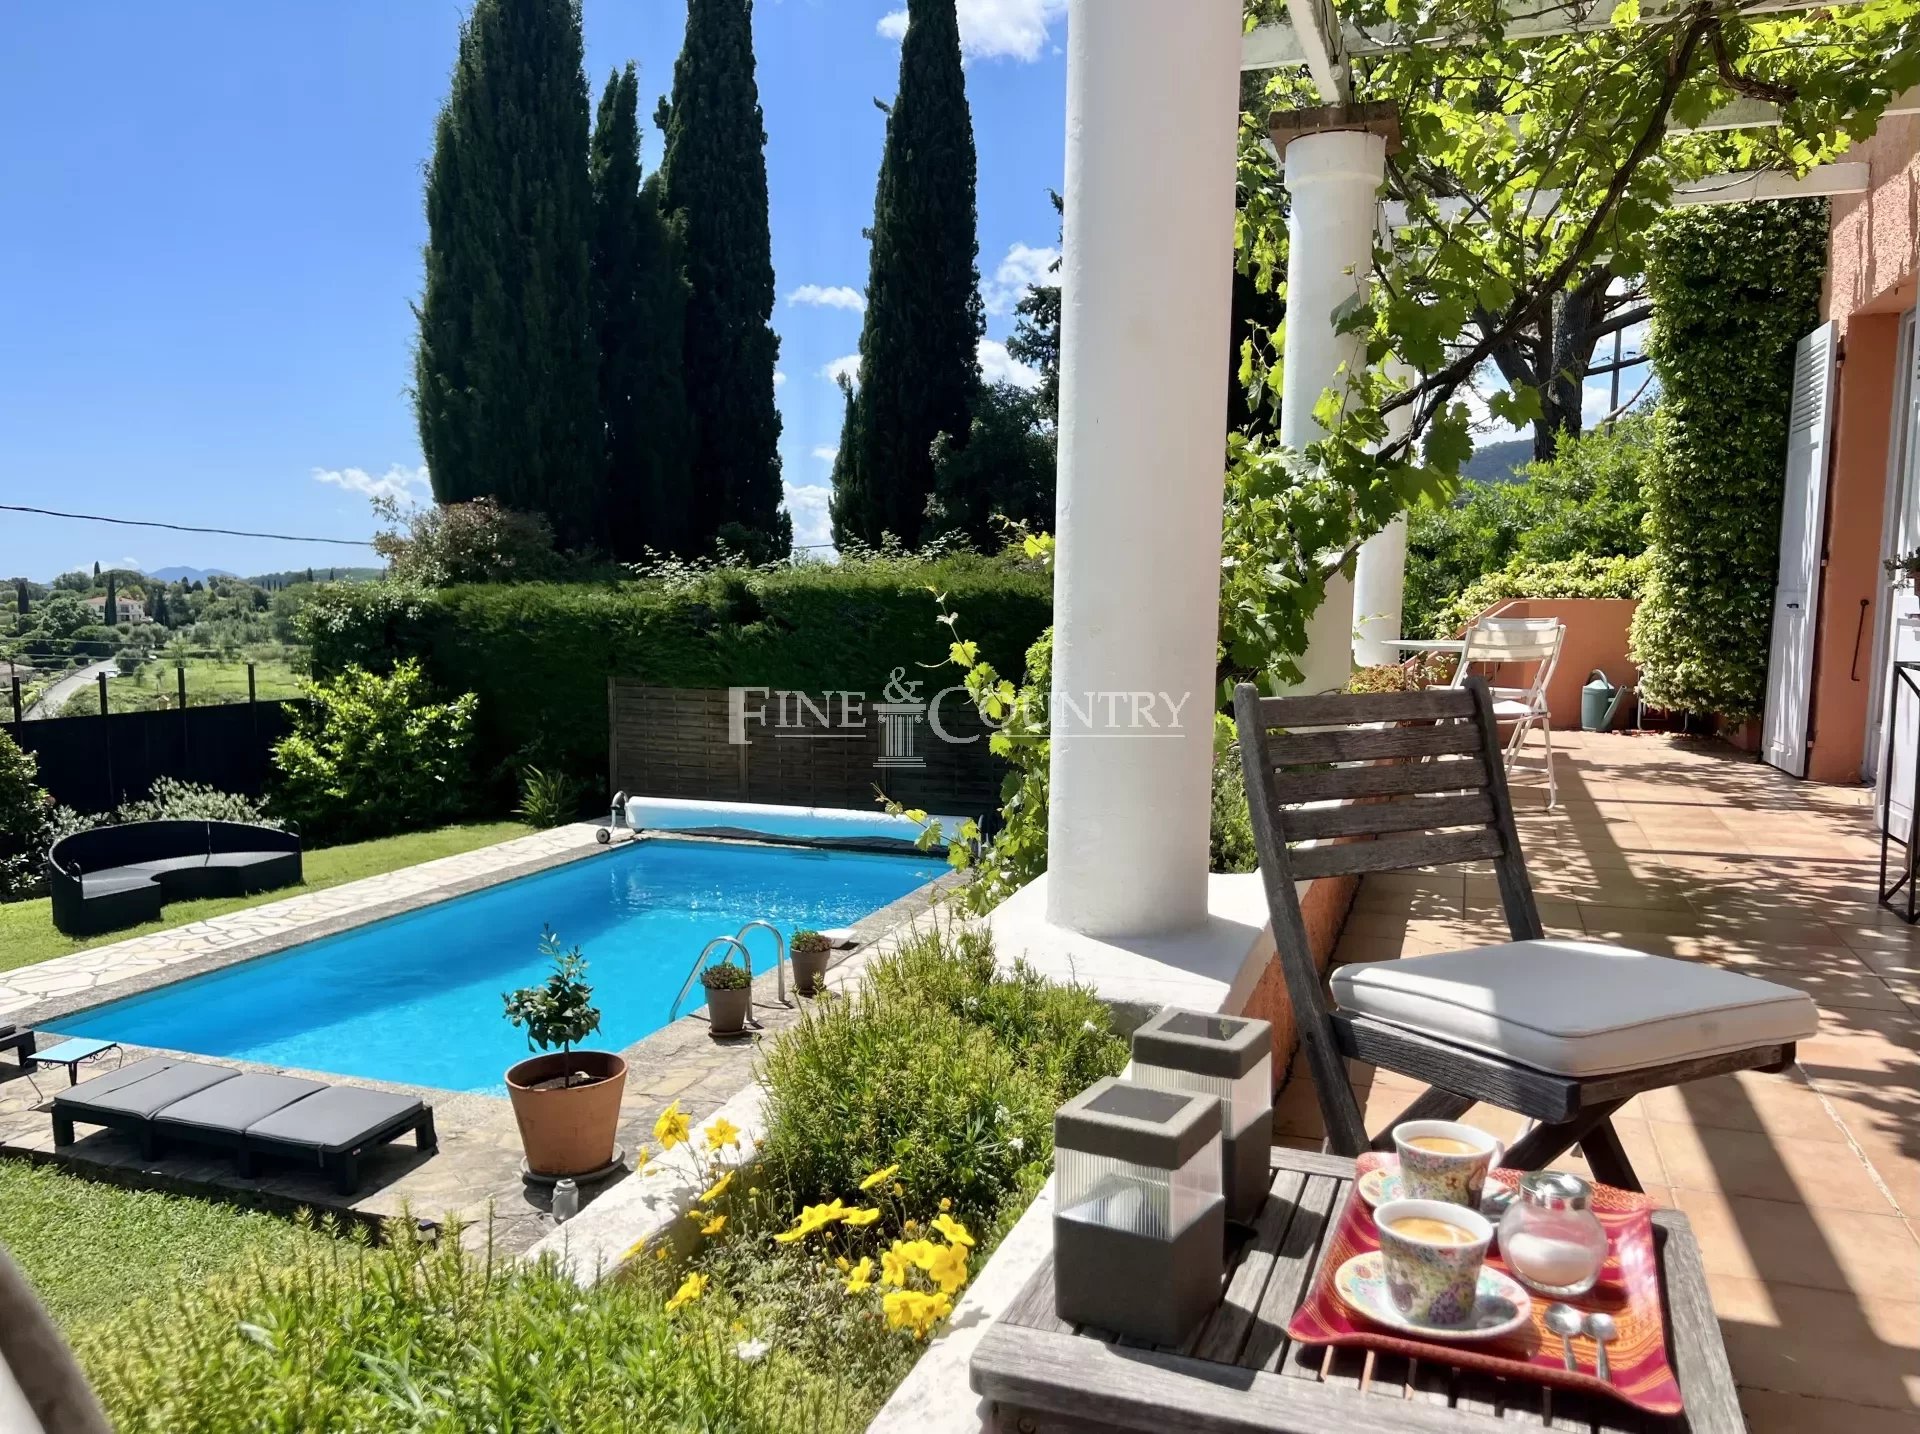 Villa for sale close to Vence with heated pool